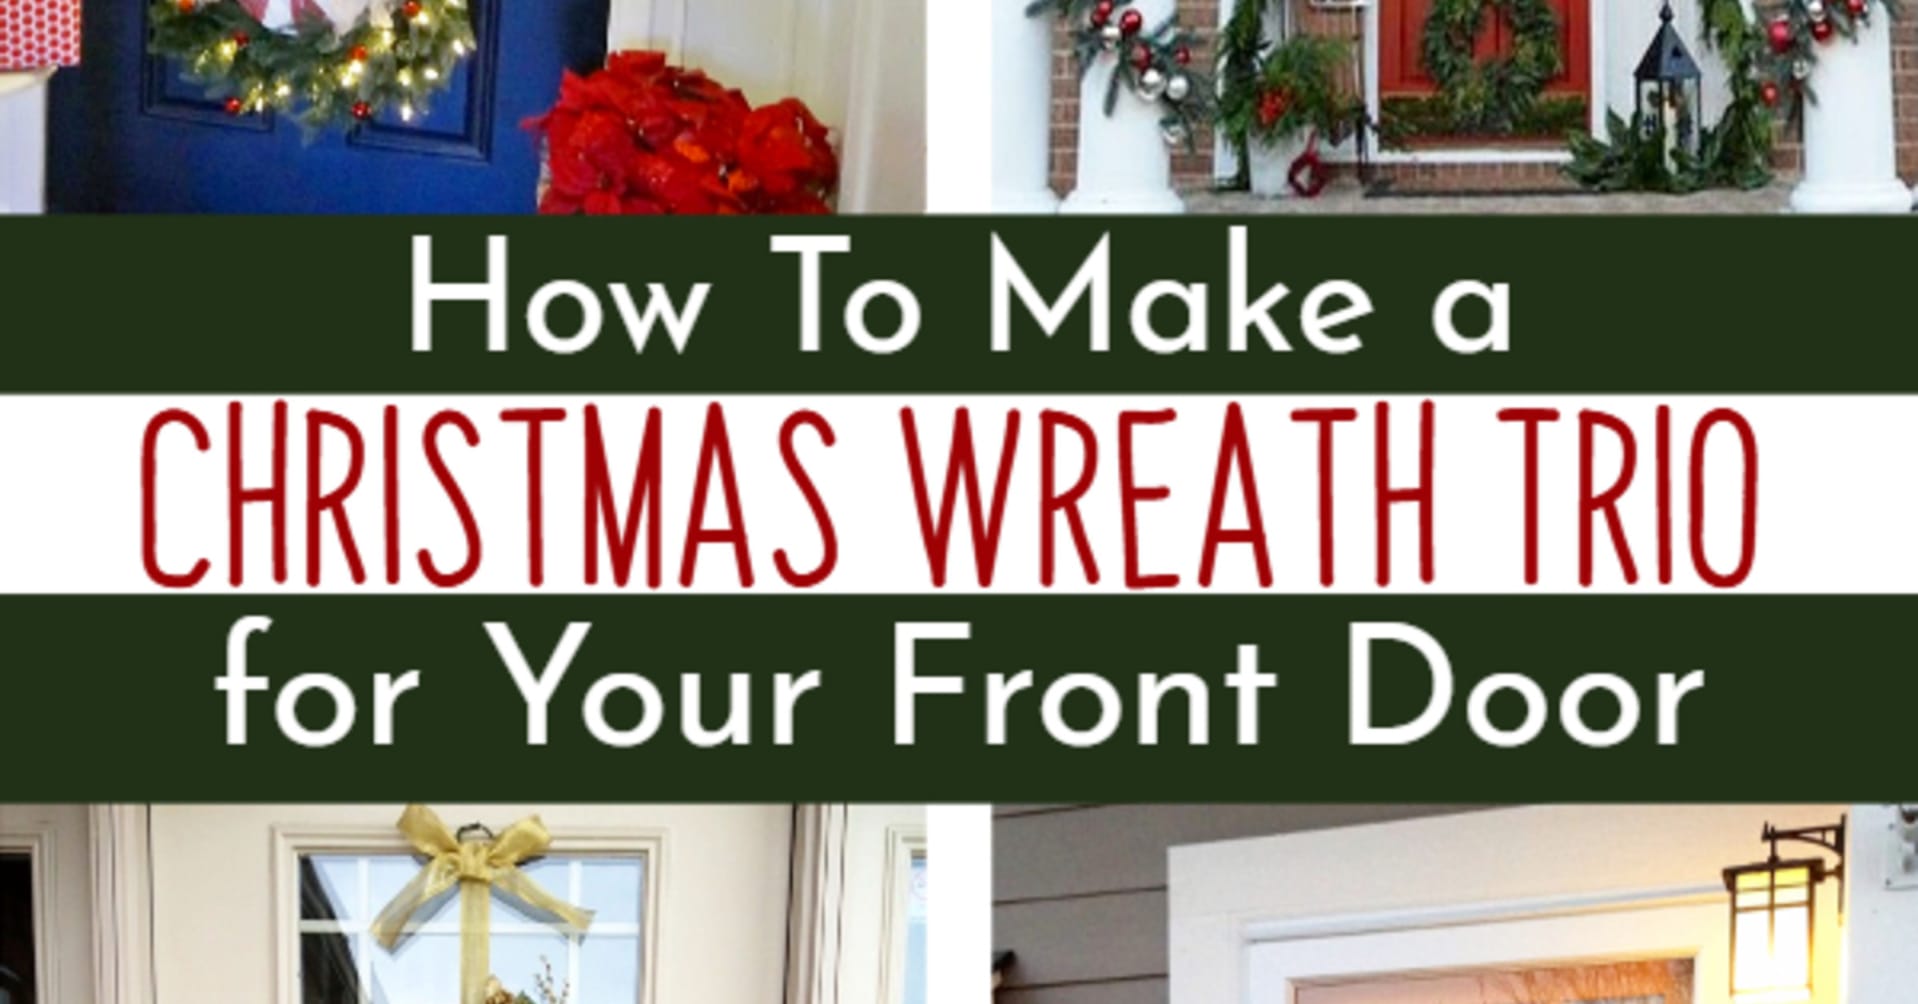 Christmas Wreath Ideas for Your Front Door. DIY Christmas decor for front porch outside or indoors - how to make a Christmas wreath trio